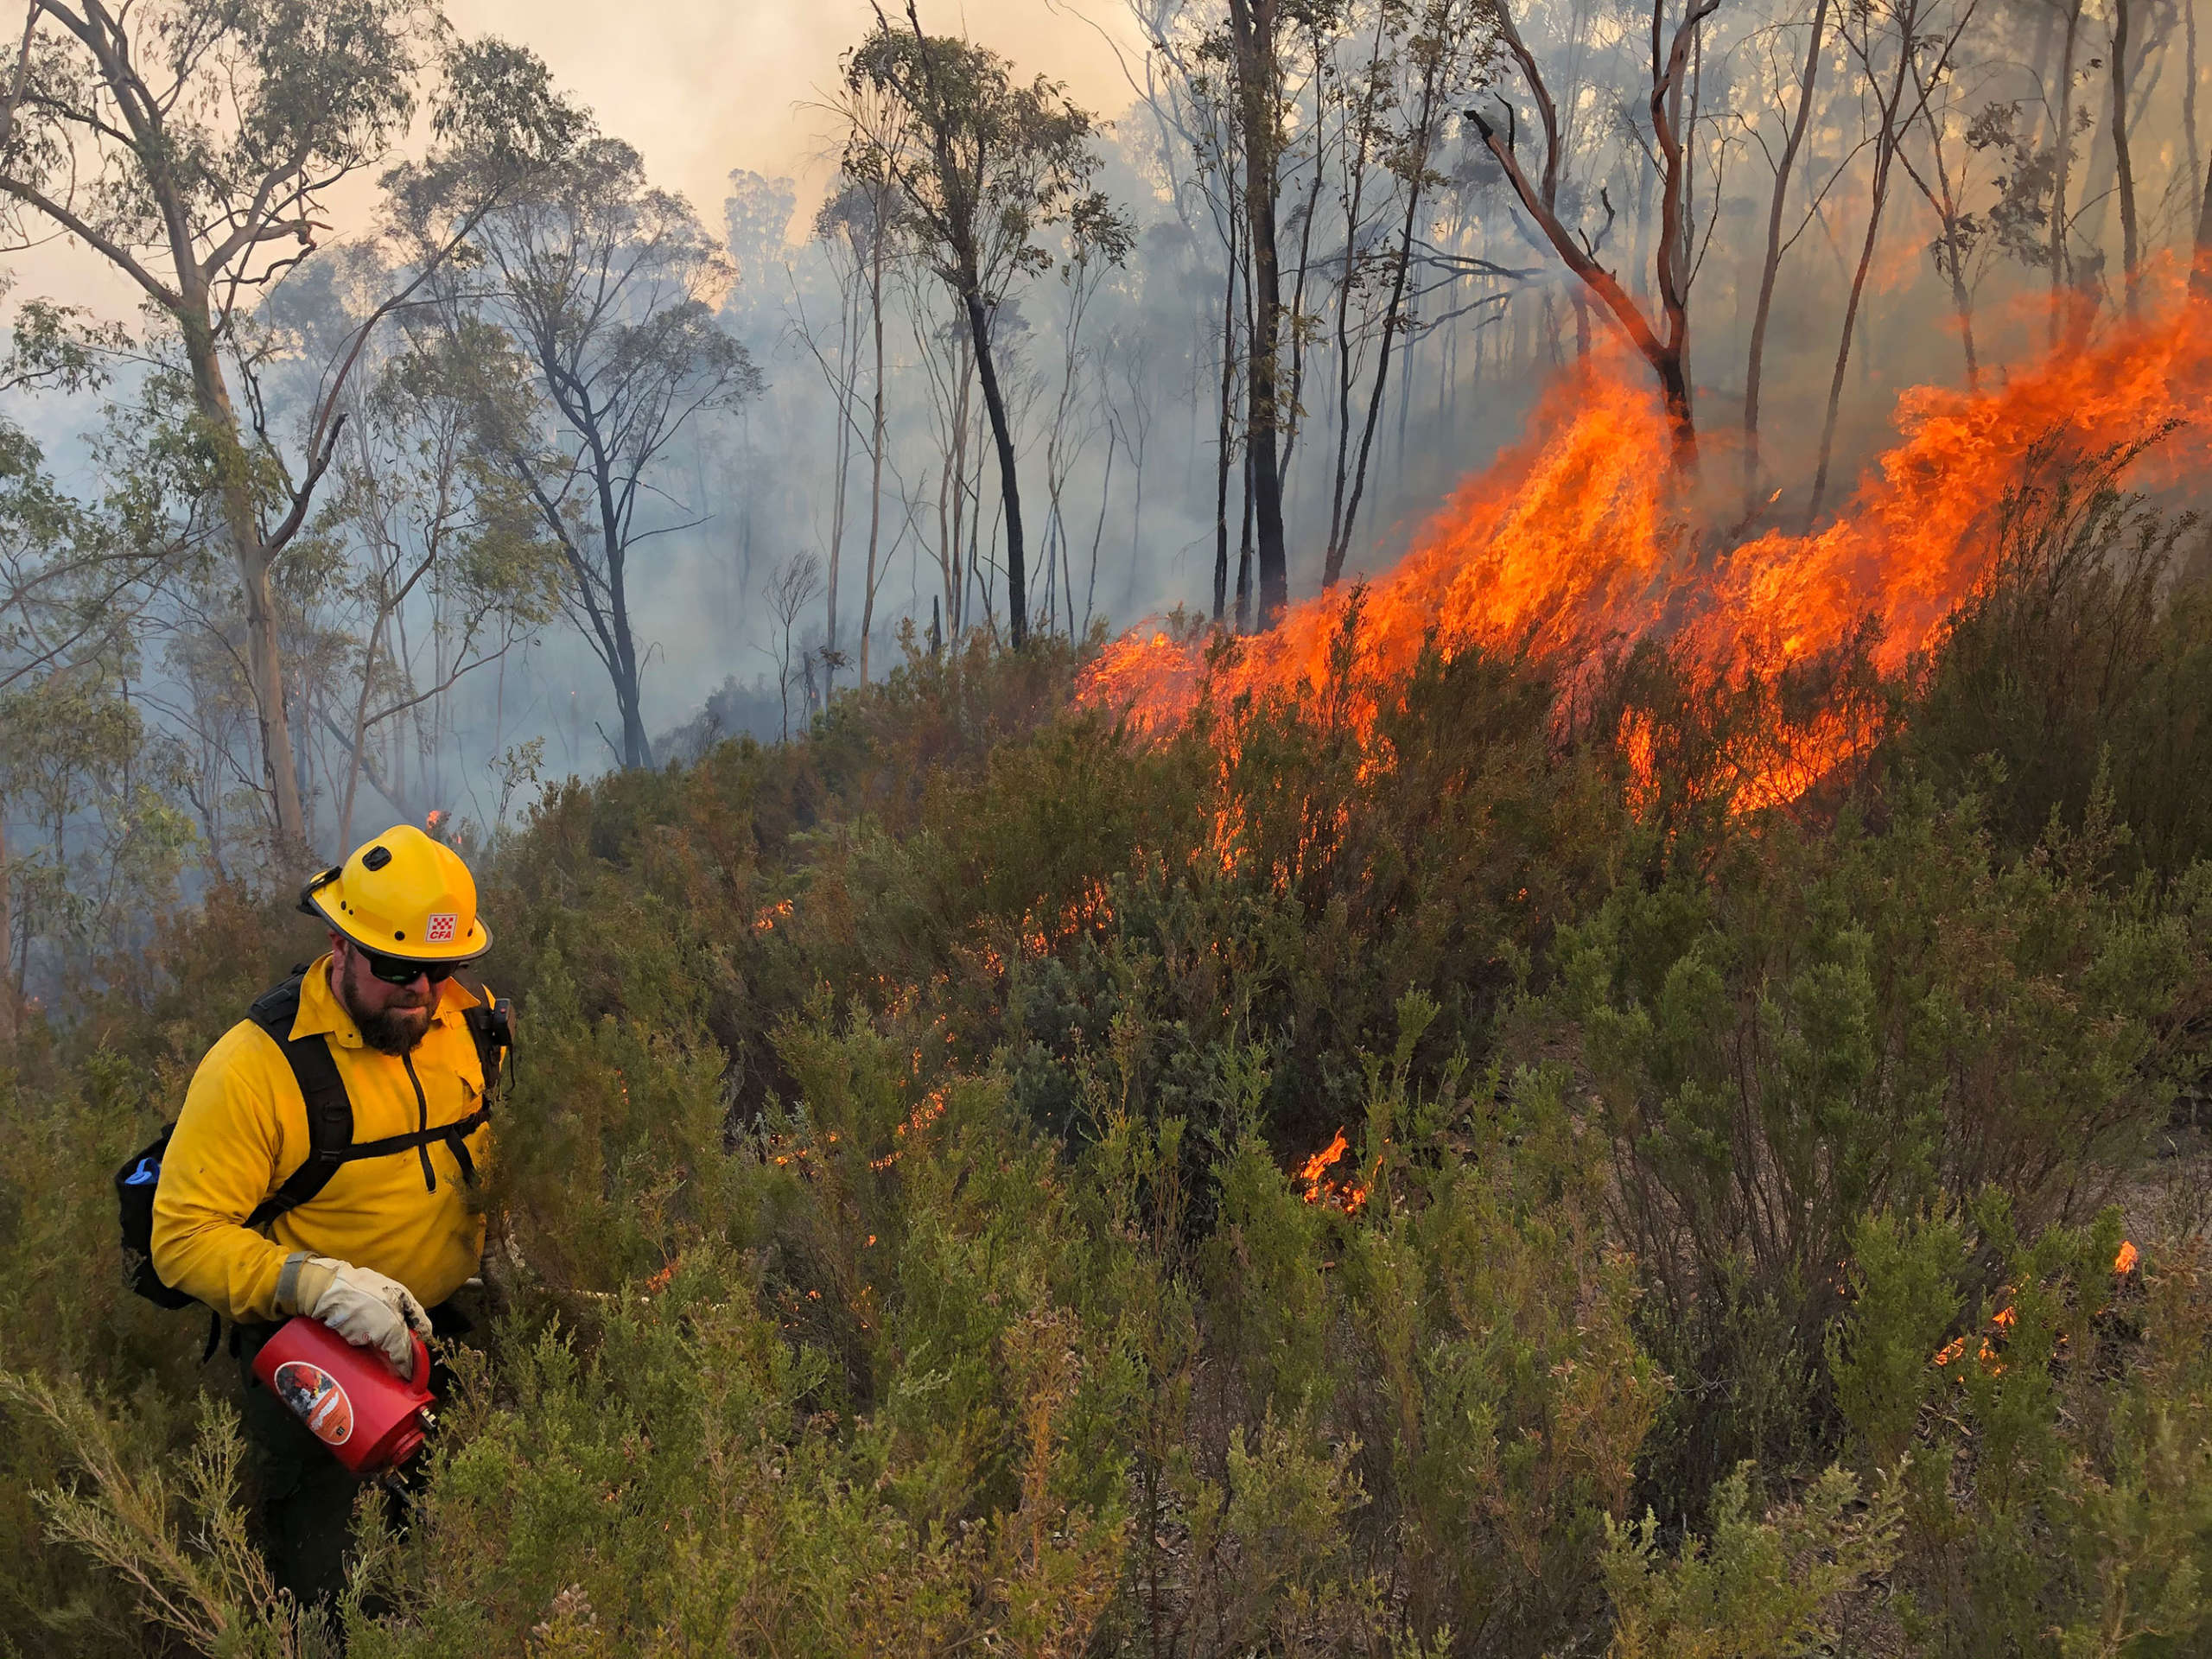 Clay Stephens from the U.S. Bureau of Land Management (Idaho) assists with fighting the Australian bushfires at Tambo Complex near Victoria.